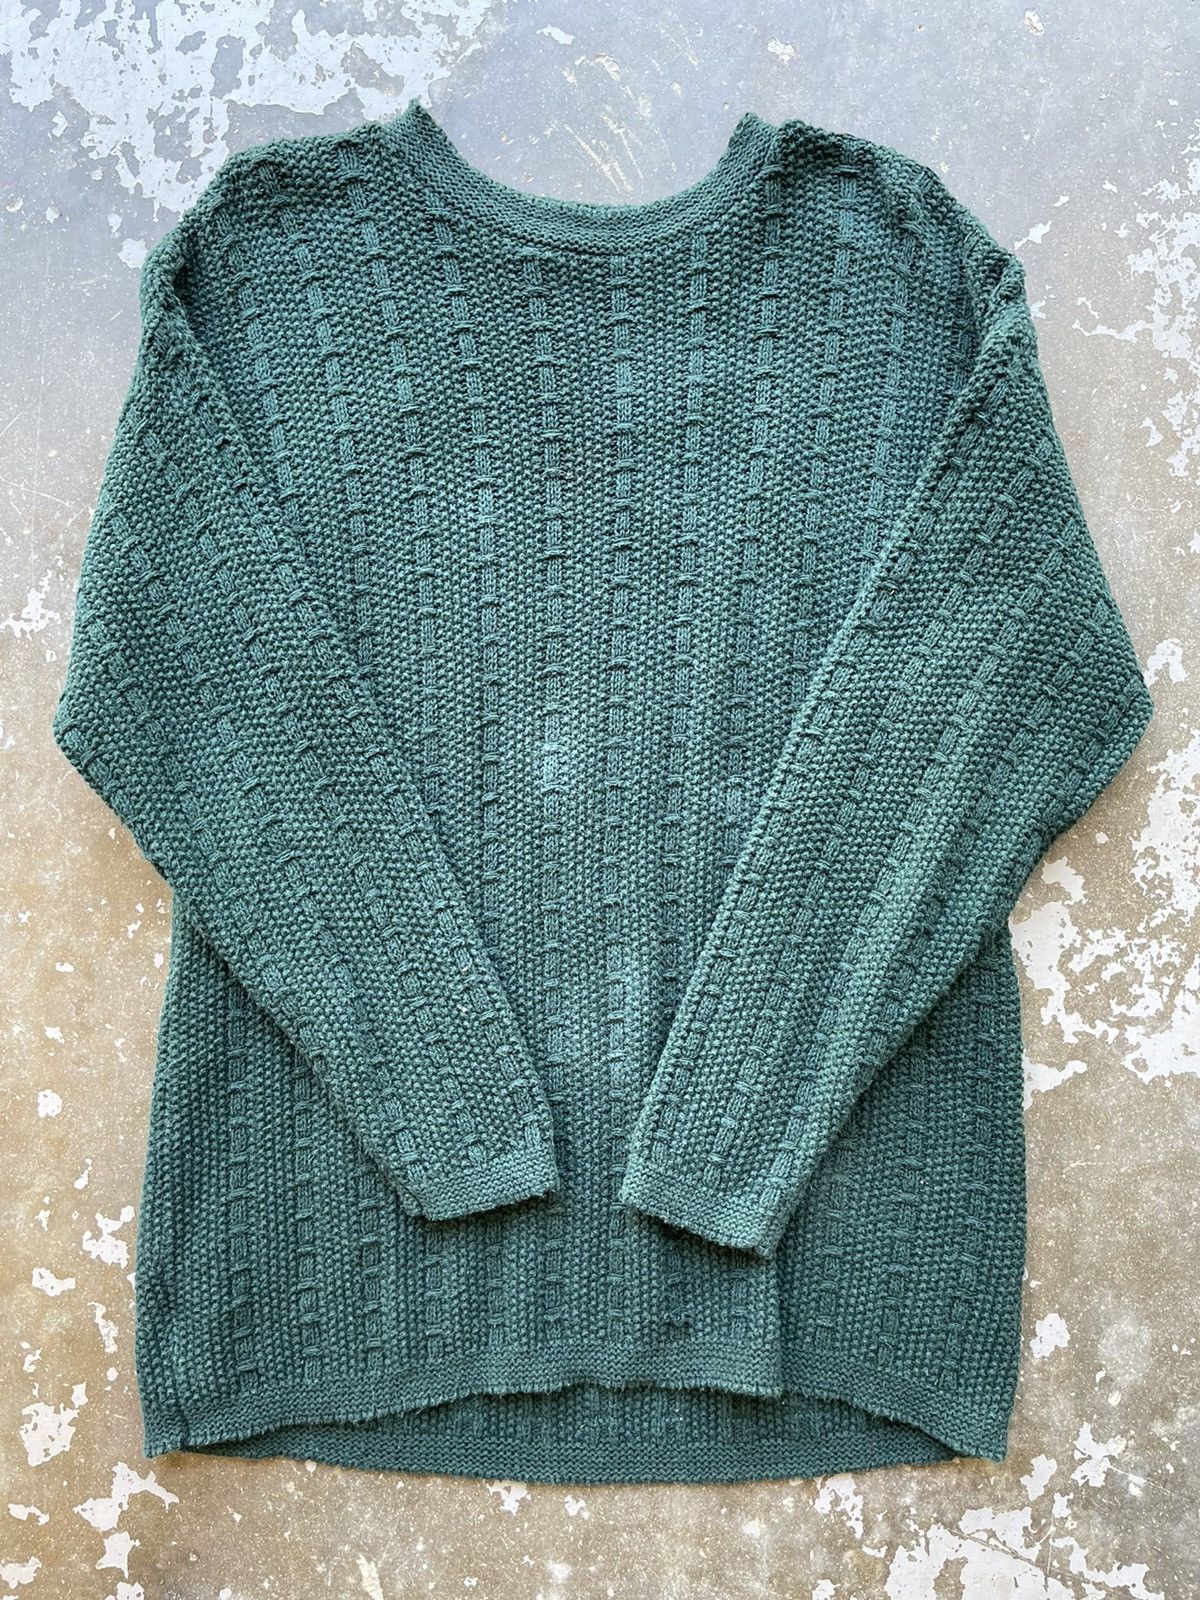 Vintage Vintage Basic Editions Knit Sweater | Grailed